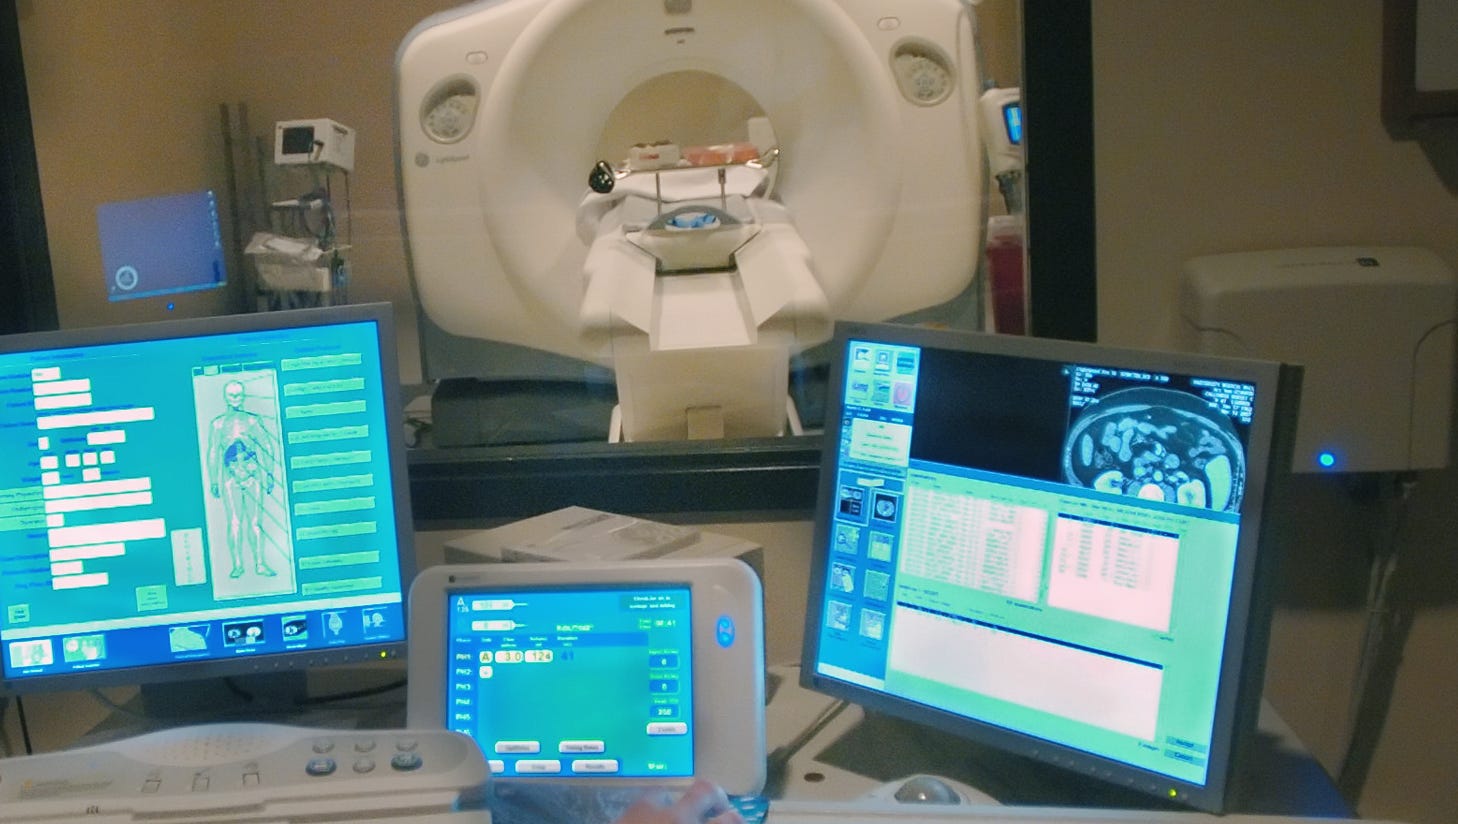 He asked if insurance would pay for CT scan. The hospital said yes, then billed him 3,878